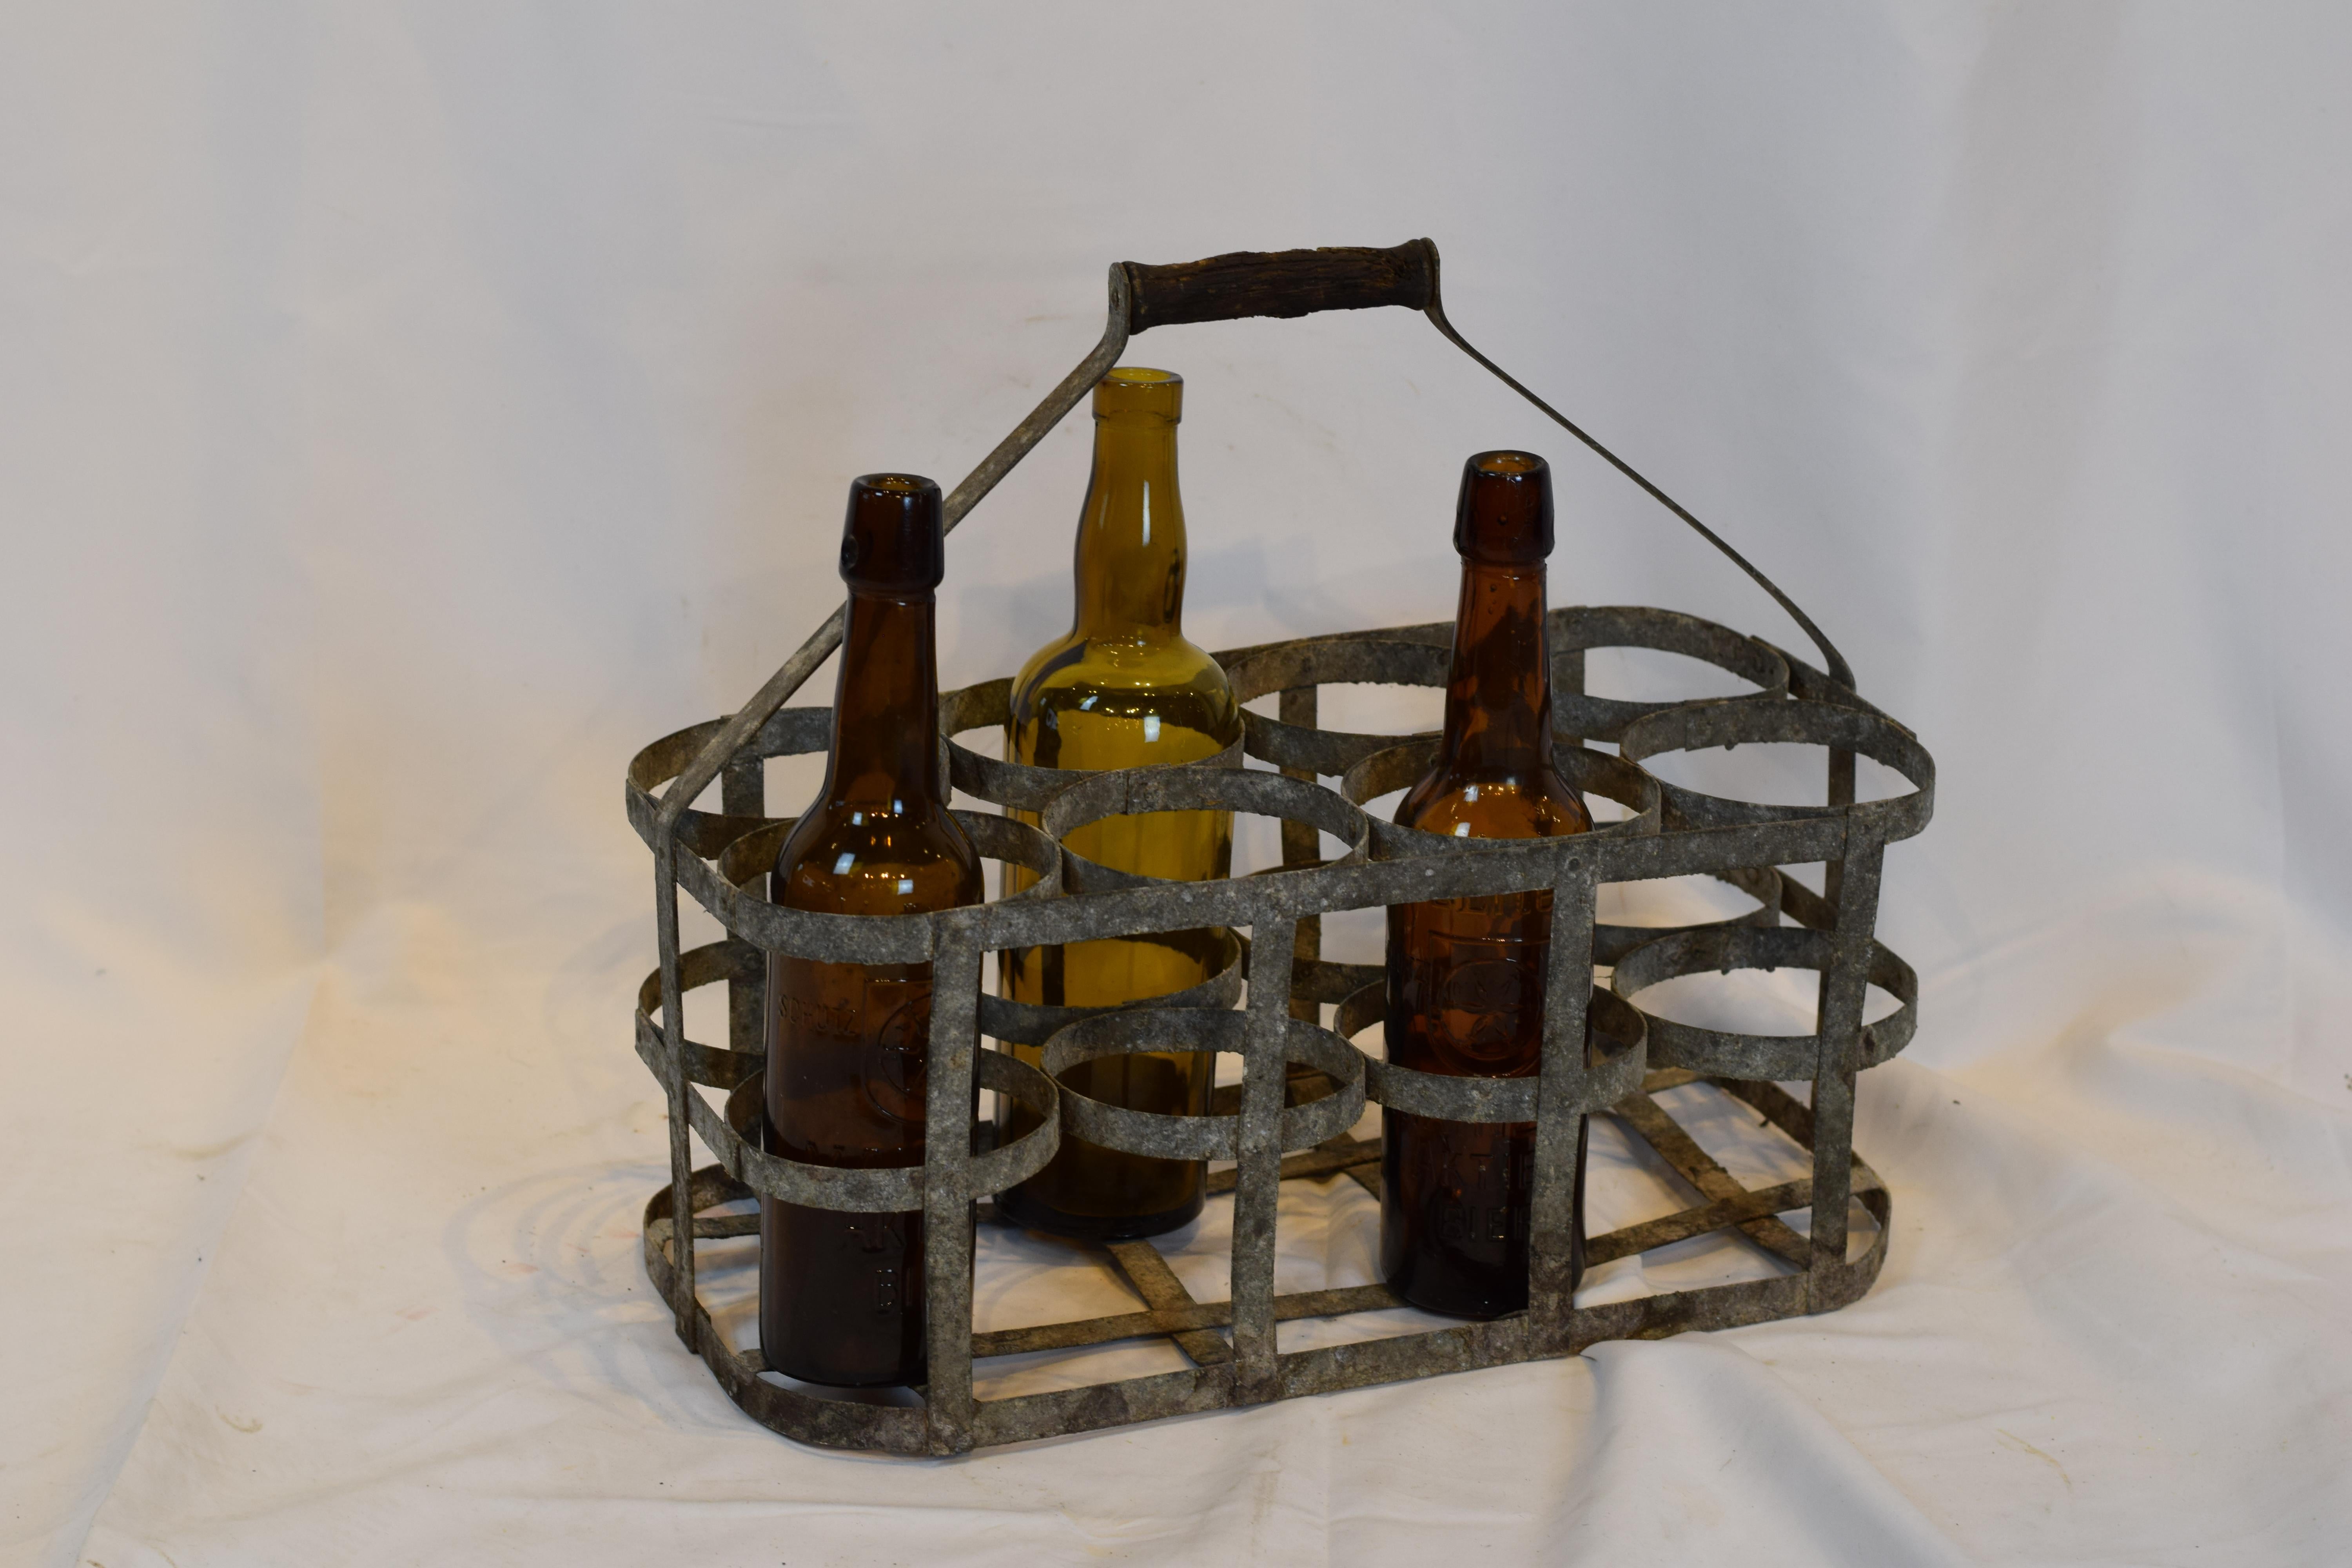 Early 20th century vintage French eight bottle wine carrier basket from France. Antique French handmade wine bottle carrier rack for 8 bottles, made of metal with a wooden handle. Used by the French for carrying wine bottles when going to the wine